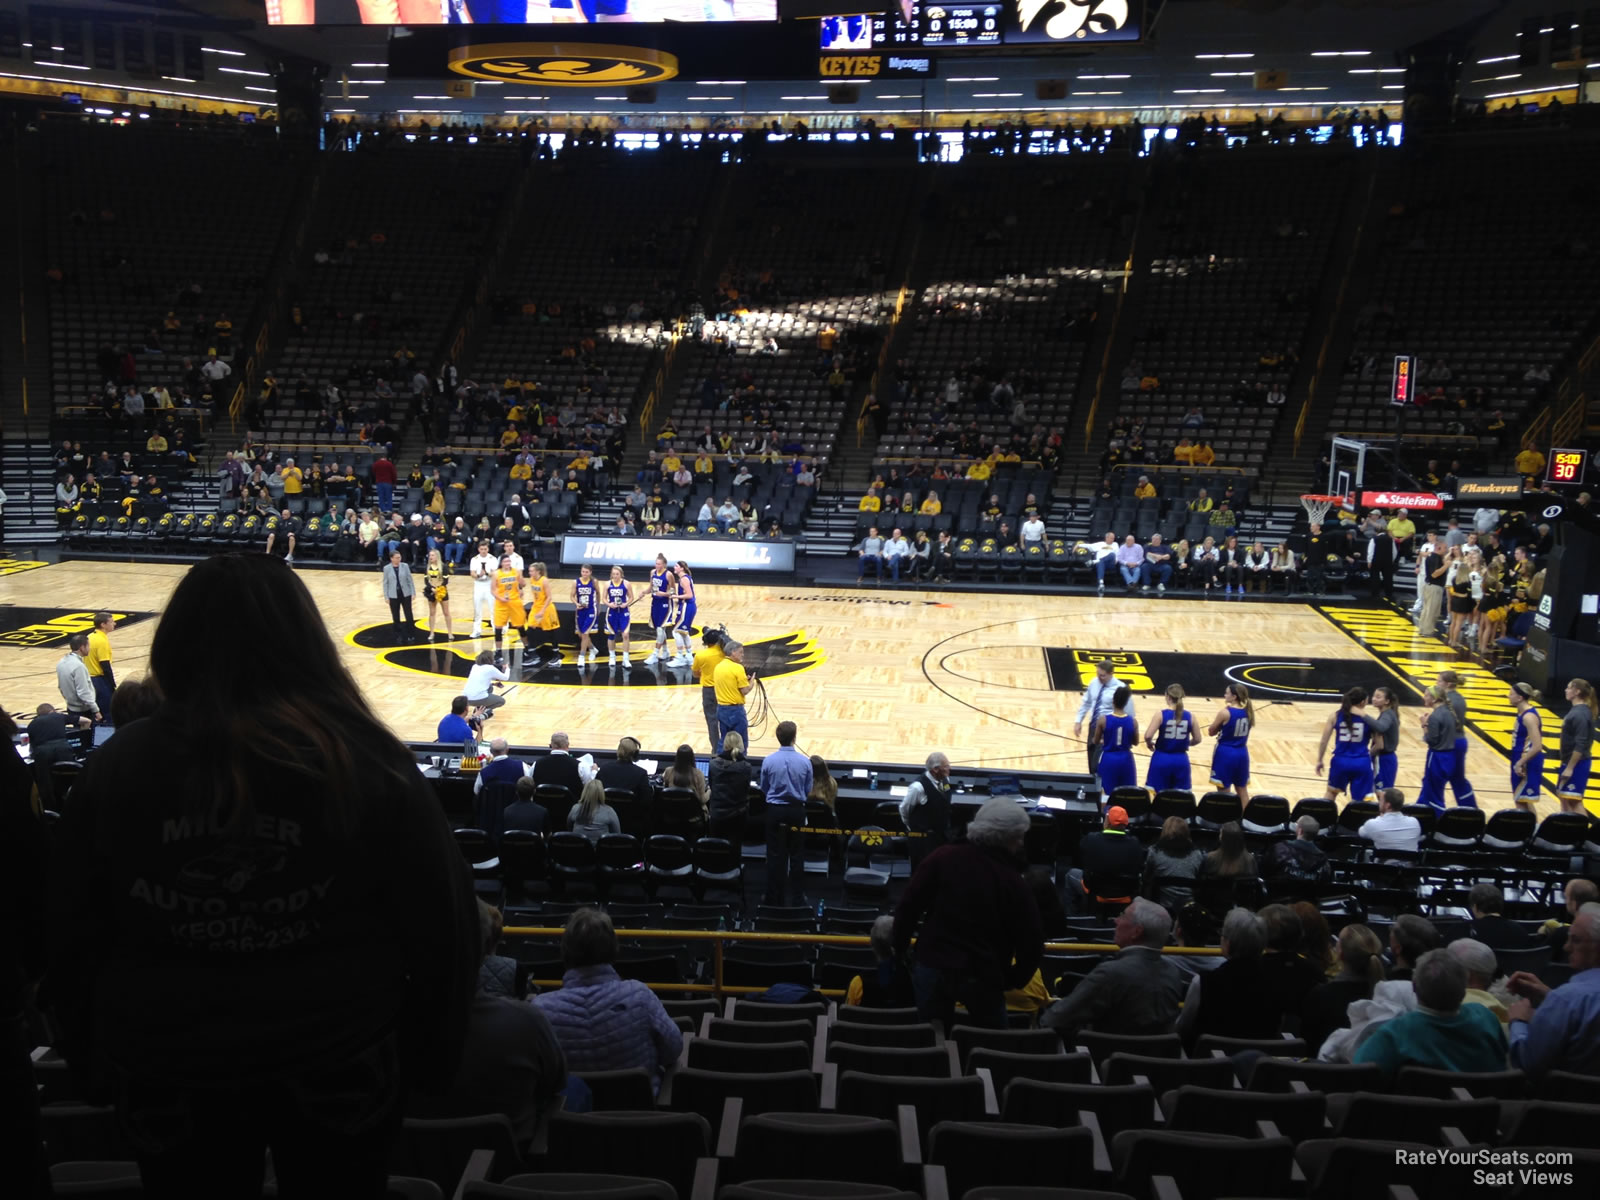 section b, row 15 seat view  - carver-hawkeye arena